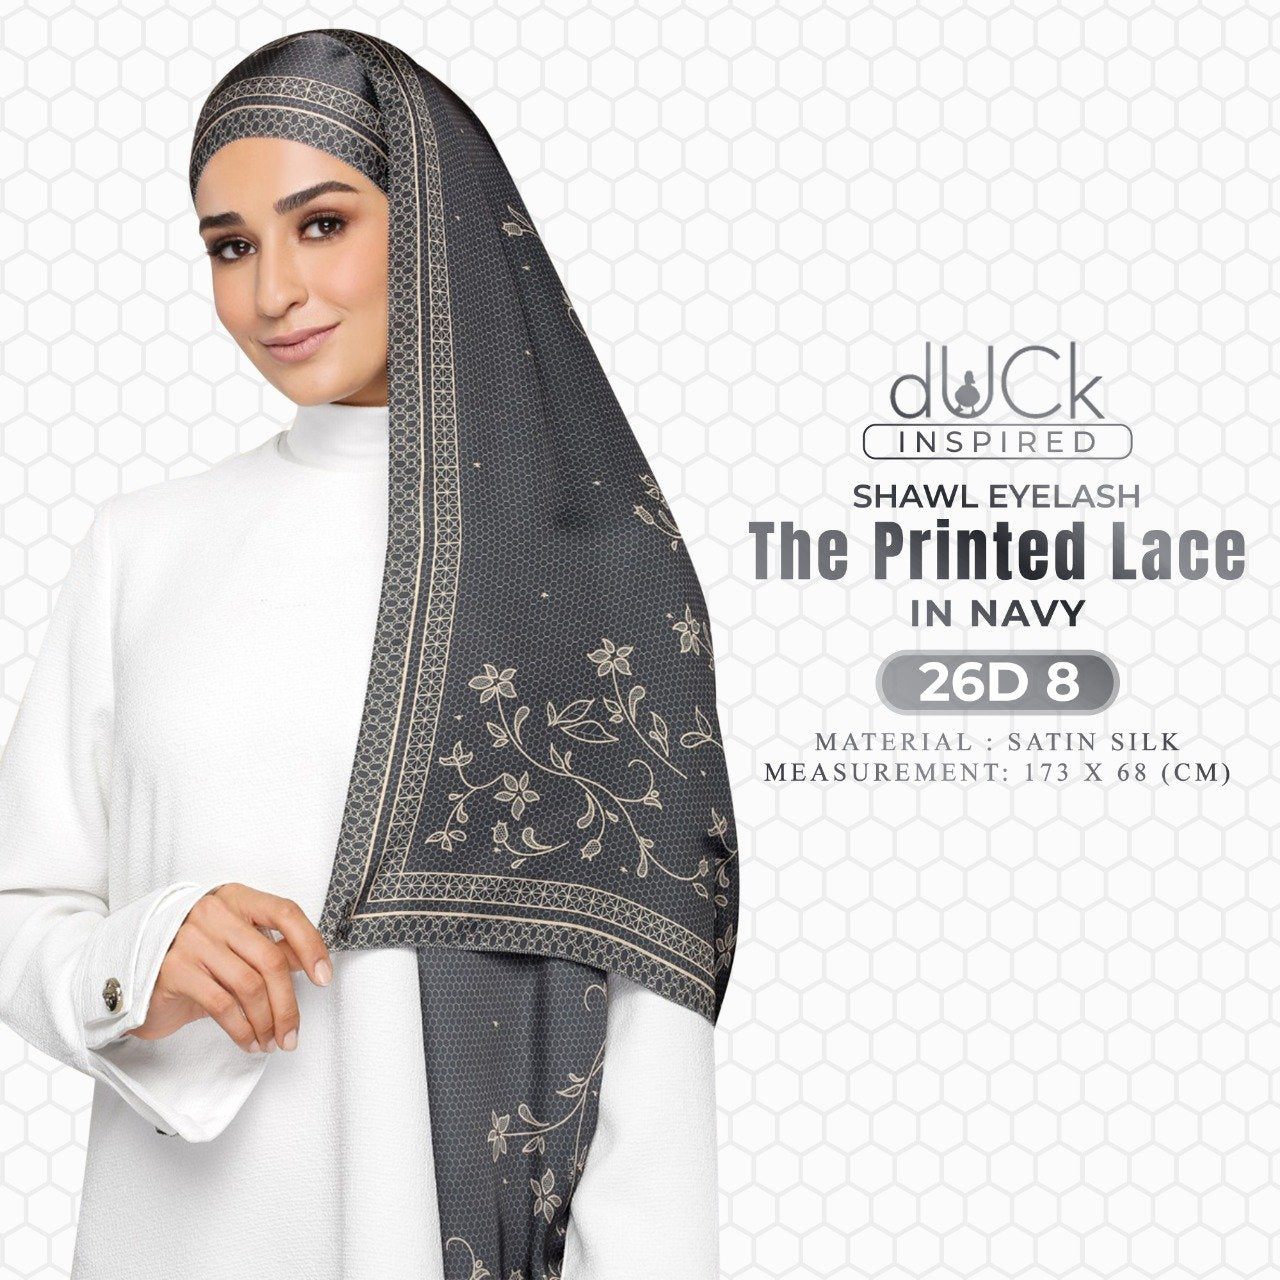 dUCk The Printed Lace Shawl Collection